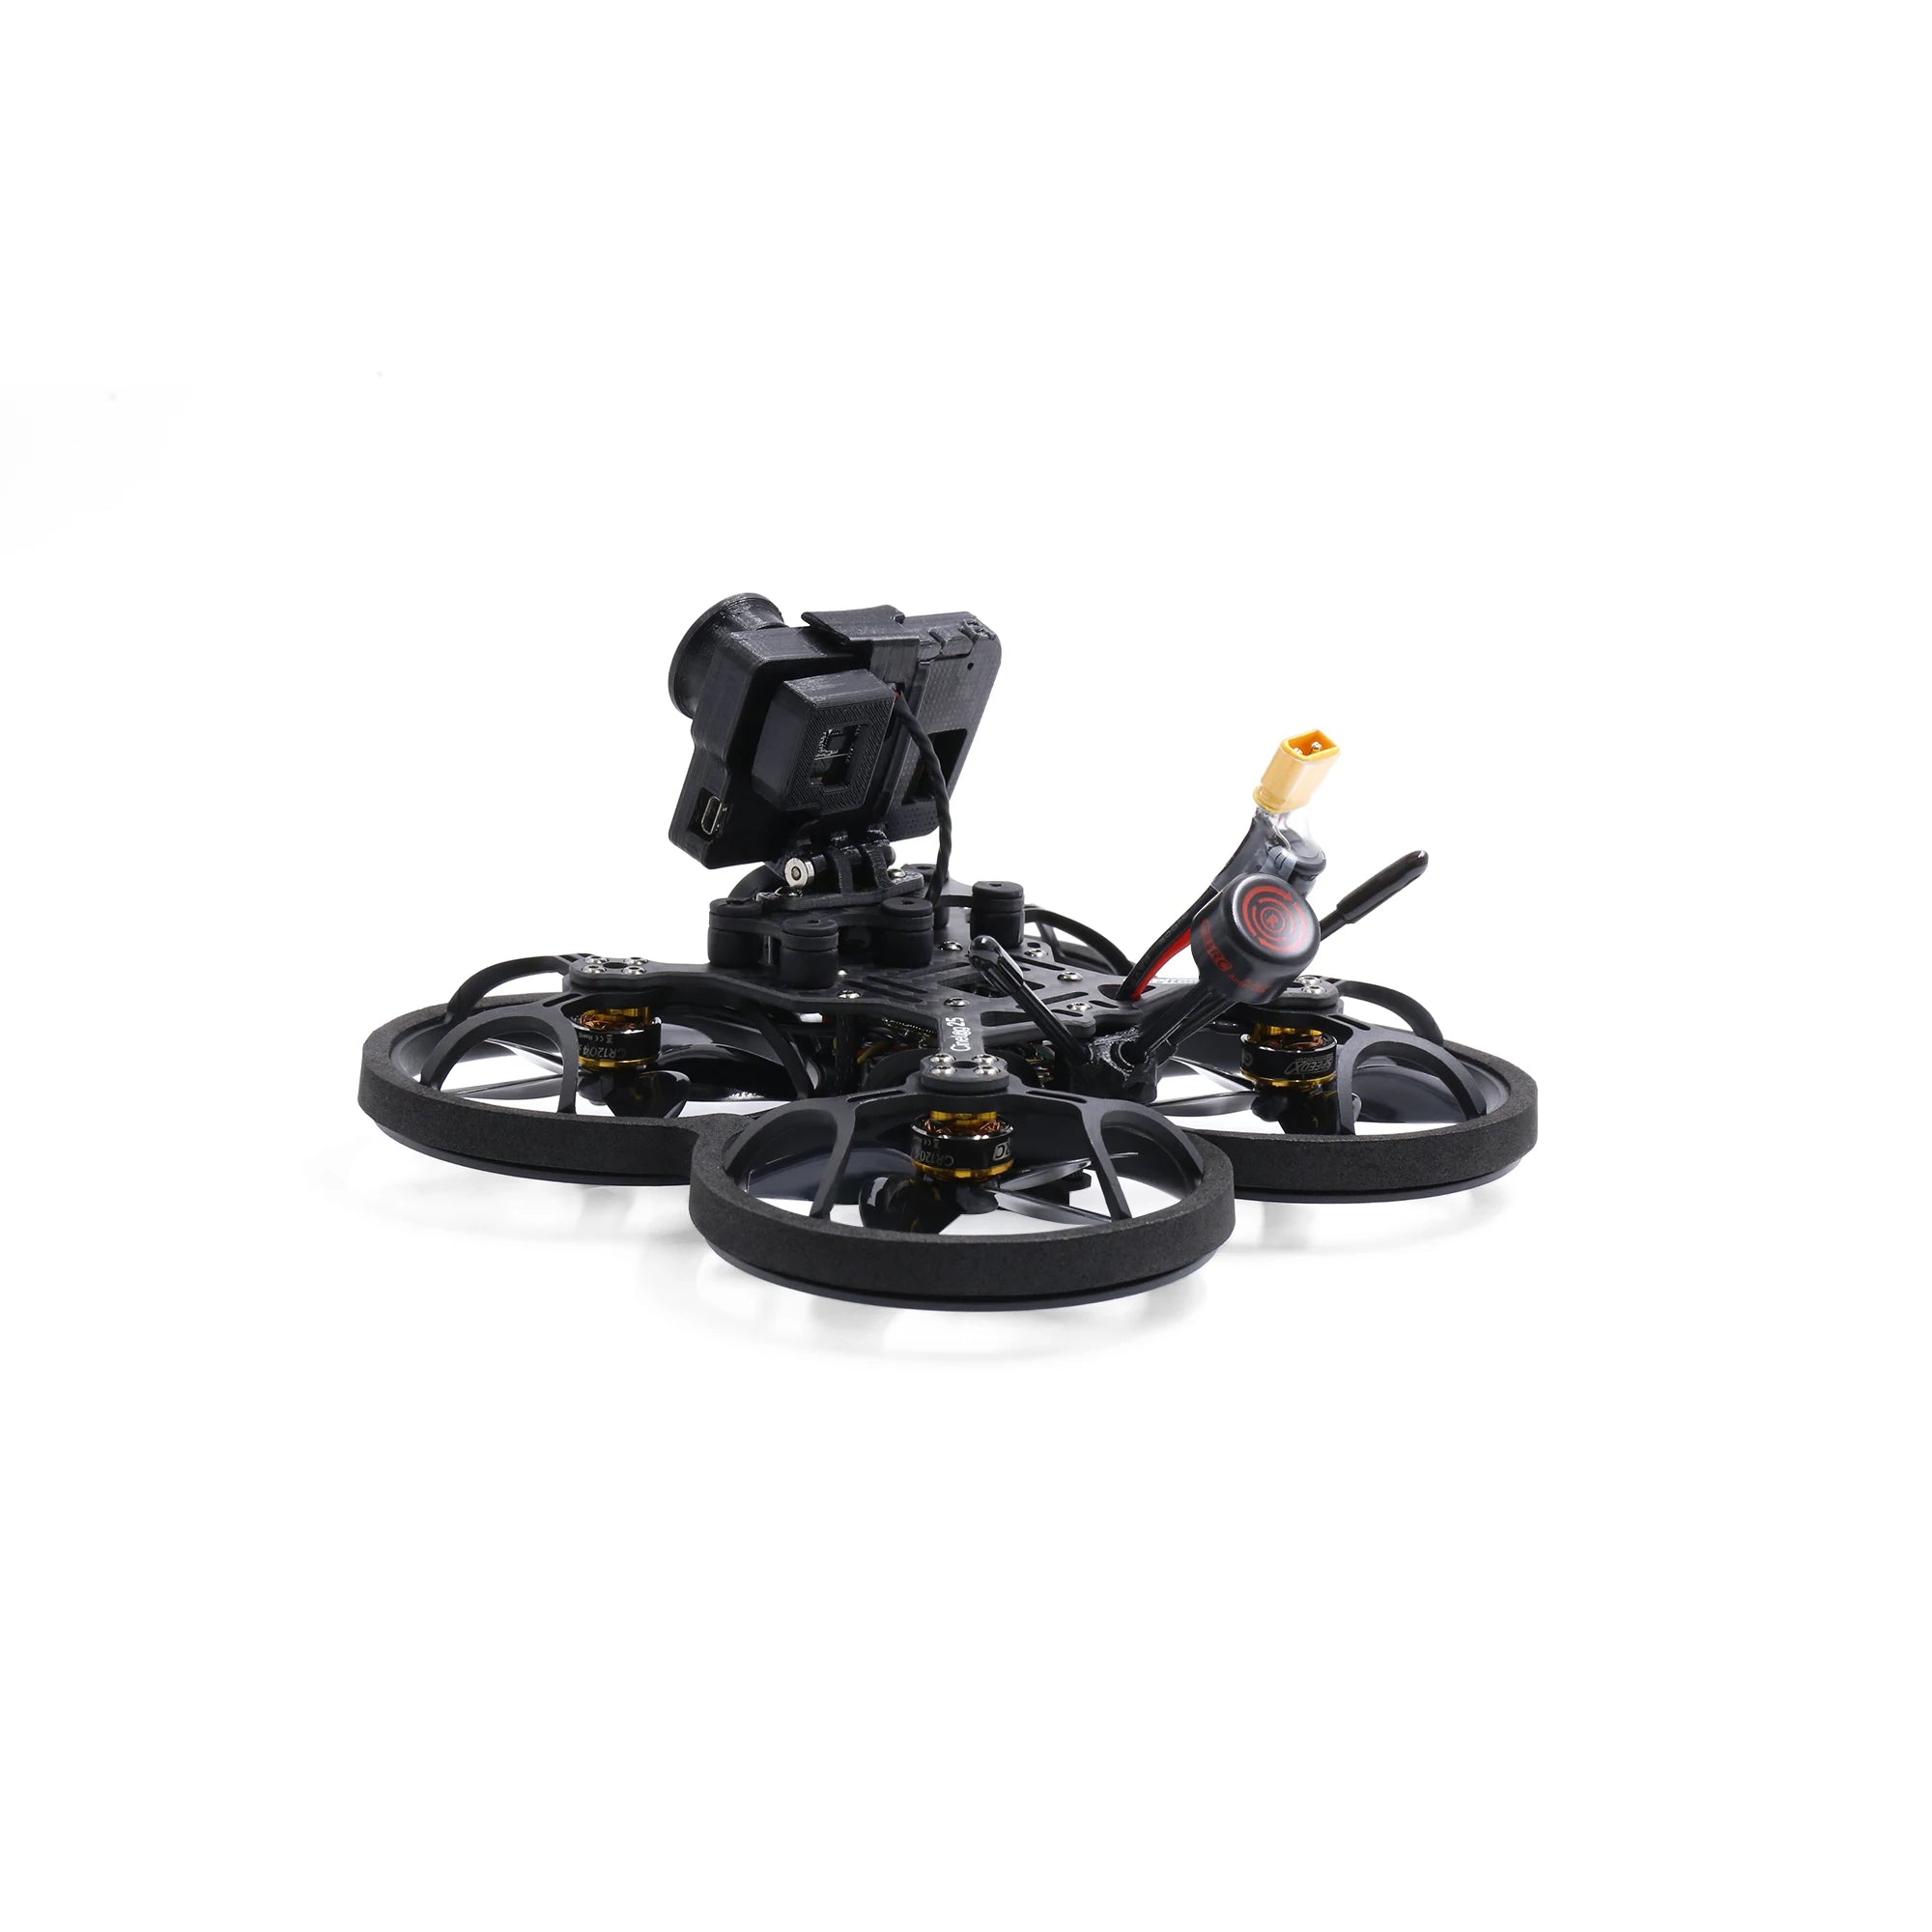 GEPRC CineLog25 Analog CineWhoop Drone, the new camera damping system basically eliminates the video's jelly and FPV camera